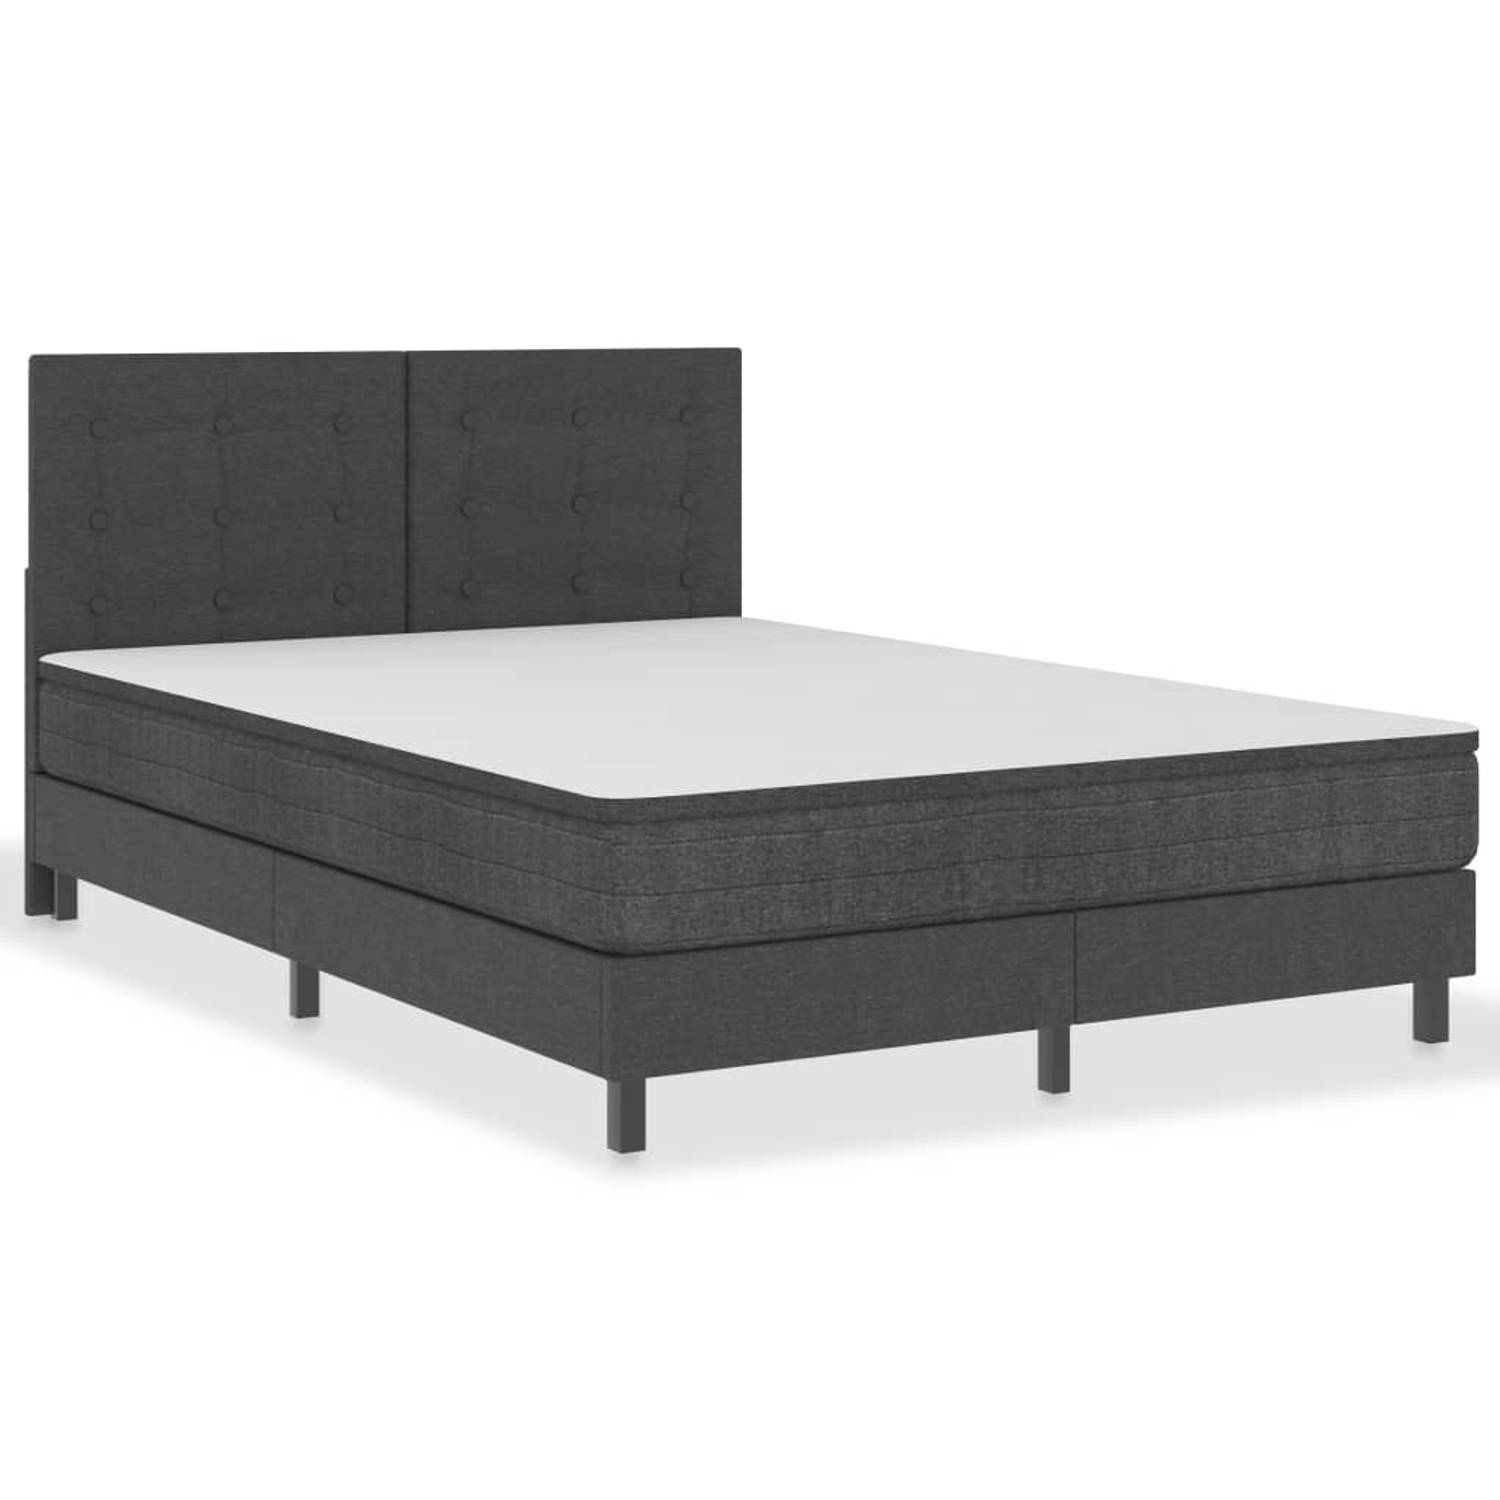 The Living Store Boxspring stof donkergrijs 140x200 cm - Boxspring - Boxsprings - Boxspringbed - Boxspringbedden - Hotelbed - Hotelbedden - Bed - Bedden - Tweepersoonsbed - Tweeper